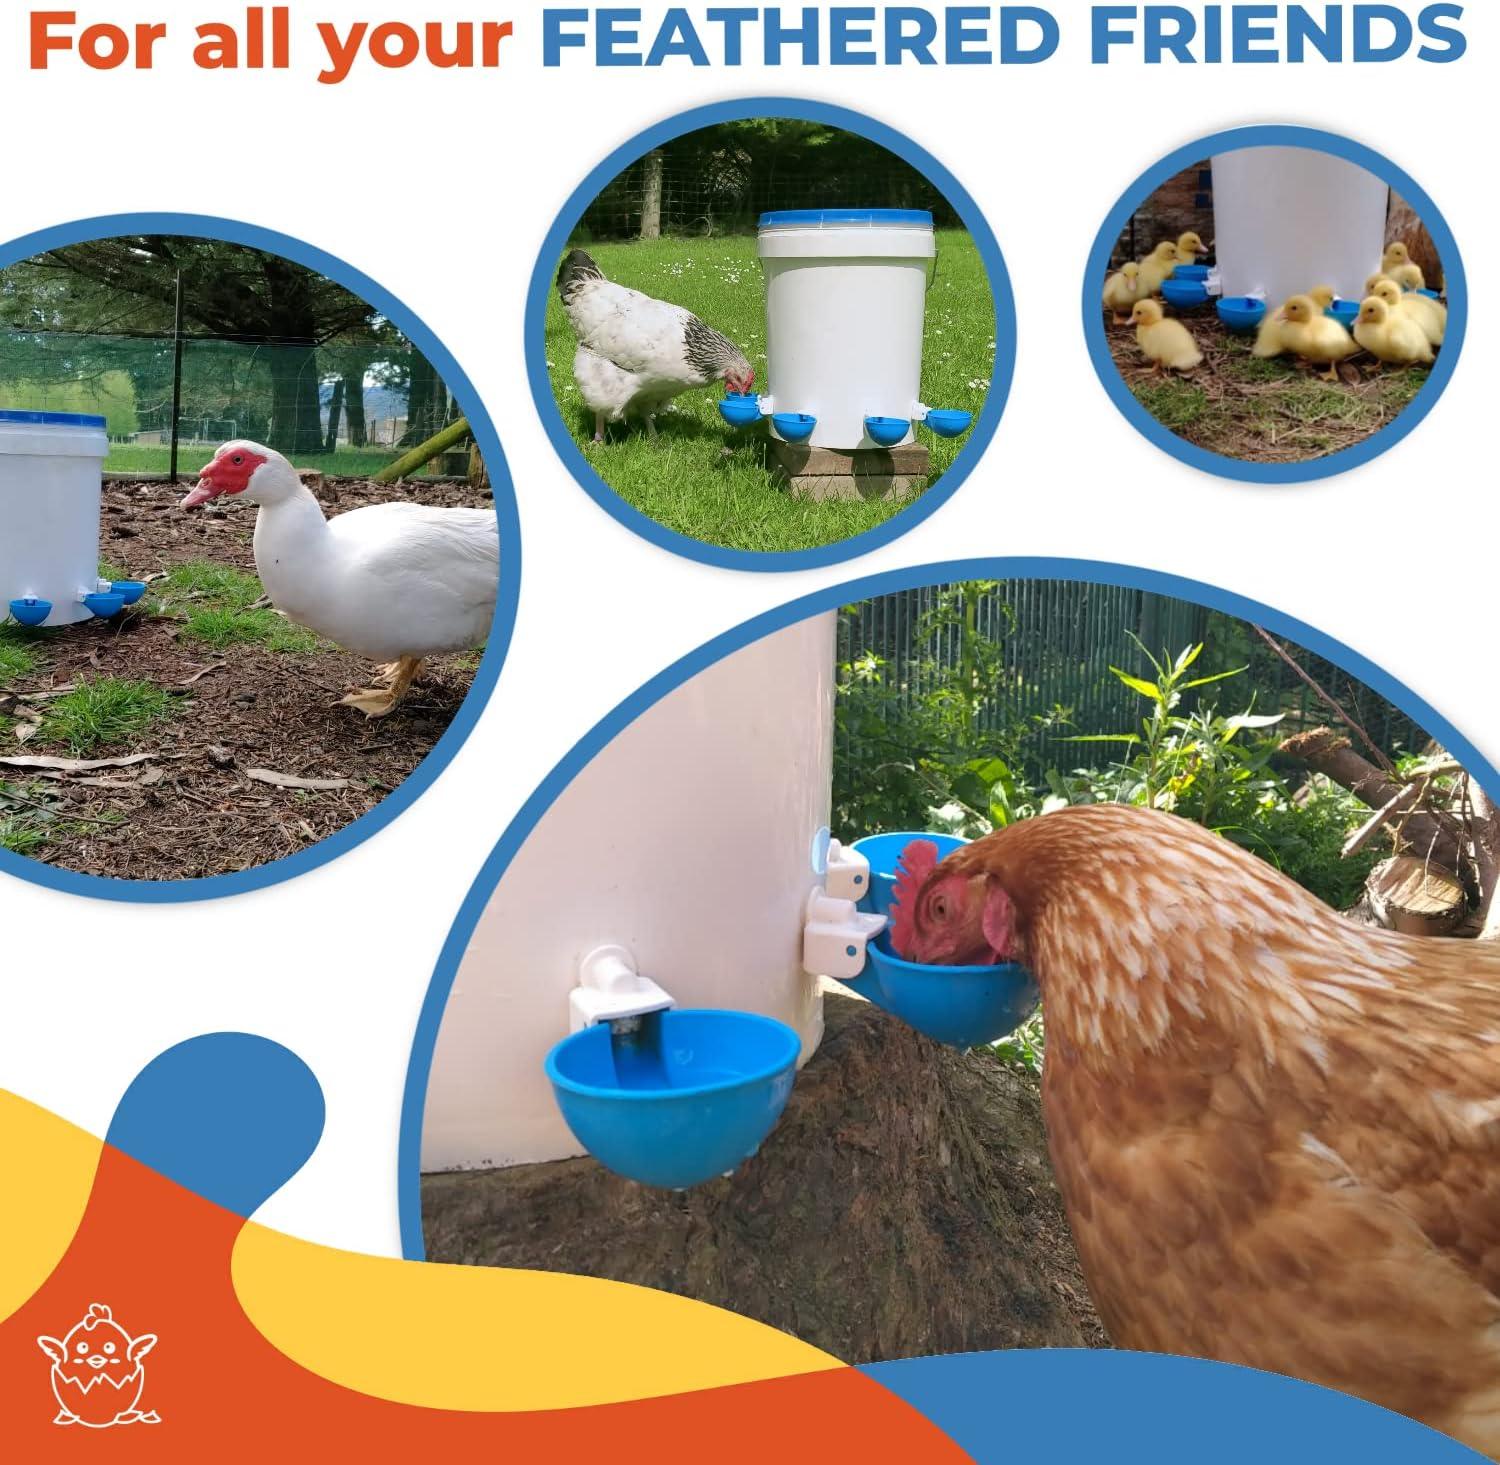 Farmight Auto-Filling Poultry Water Cup, Pack of 5 or 10 - My Pet Chicken